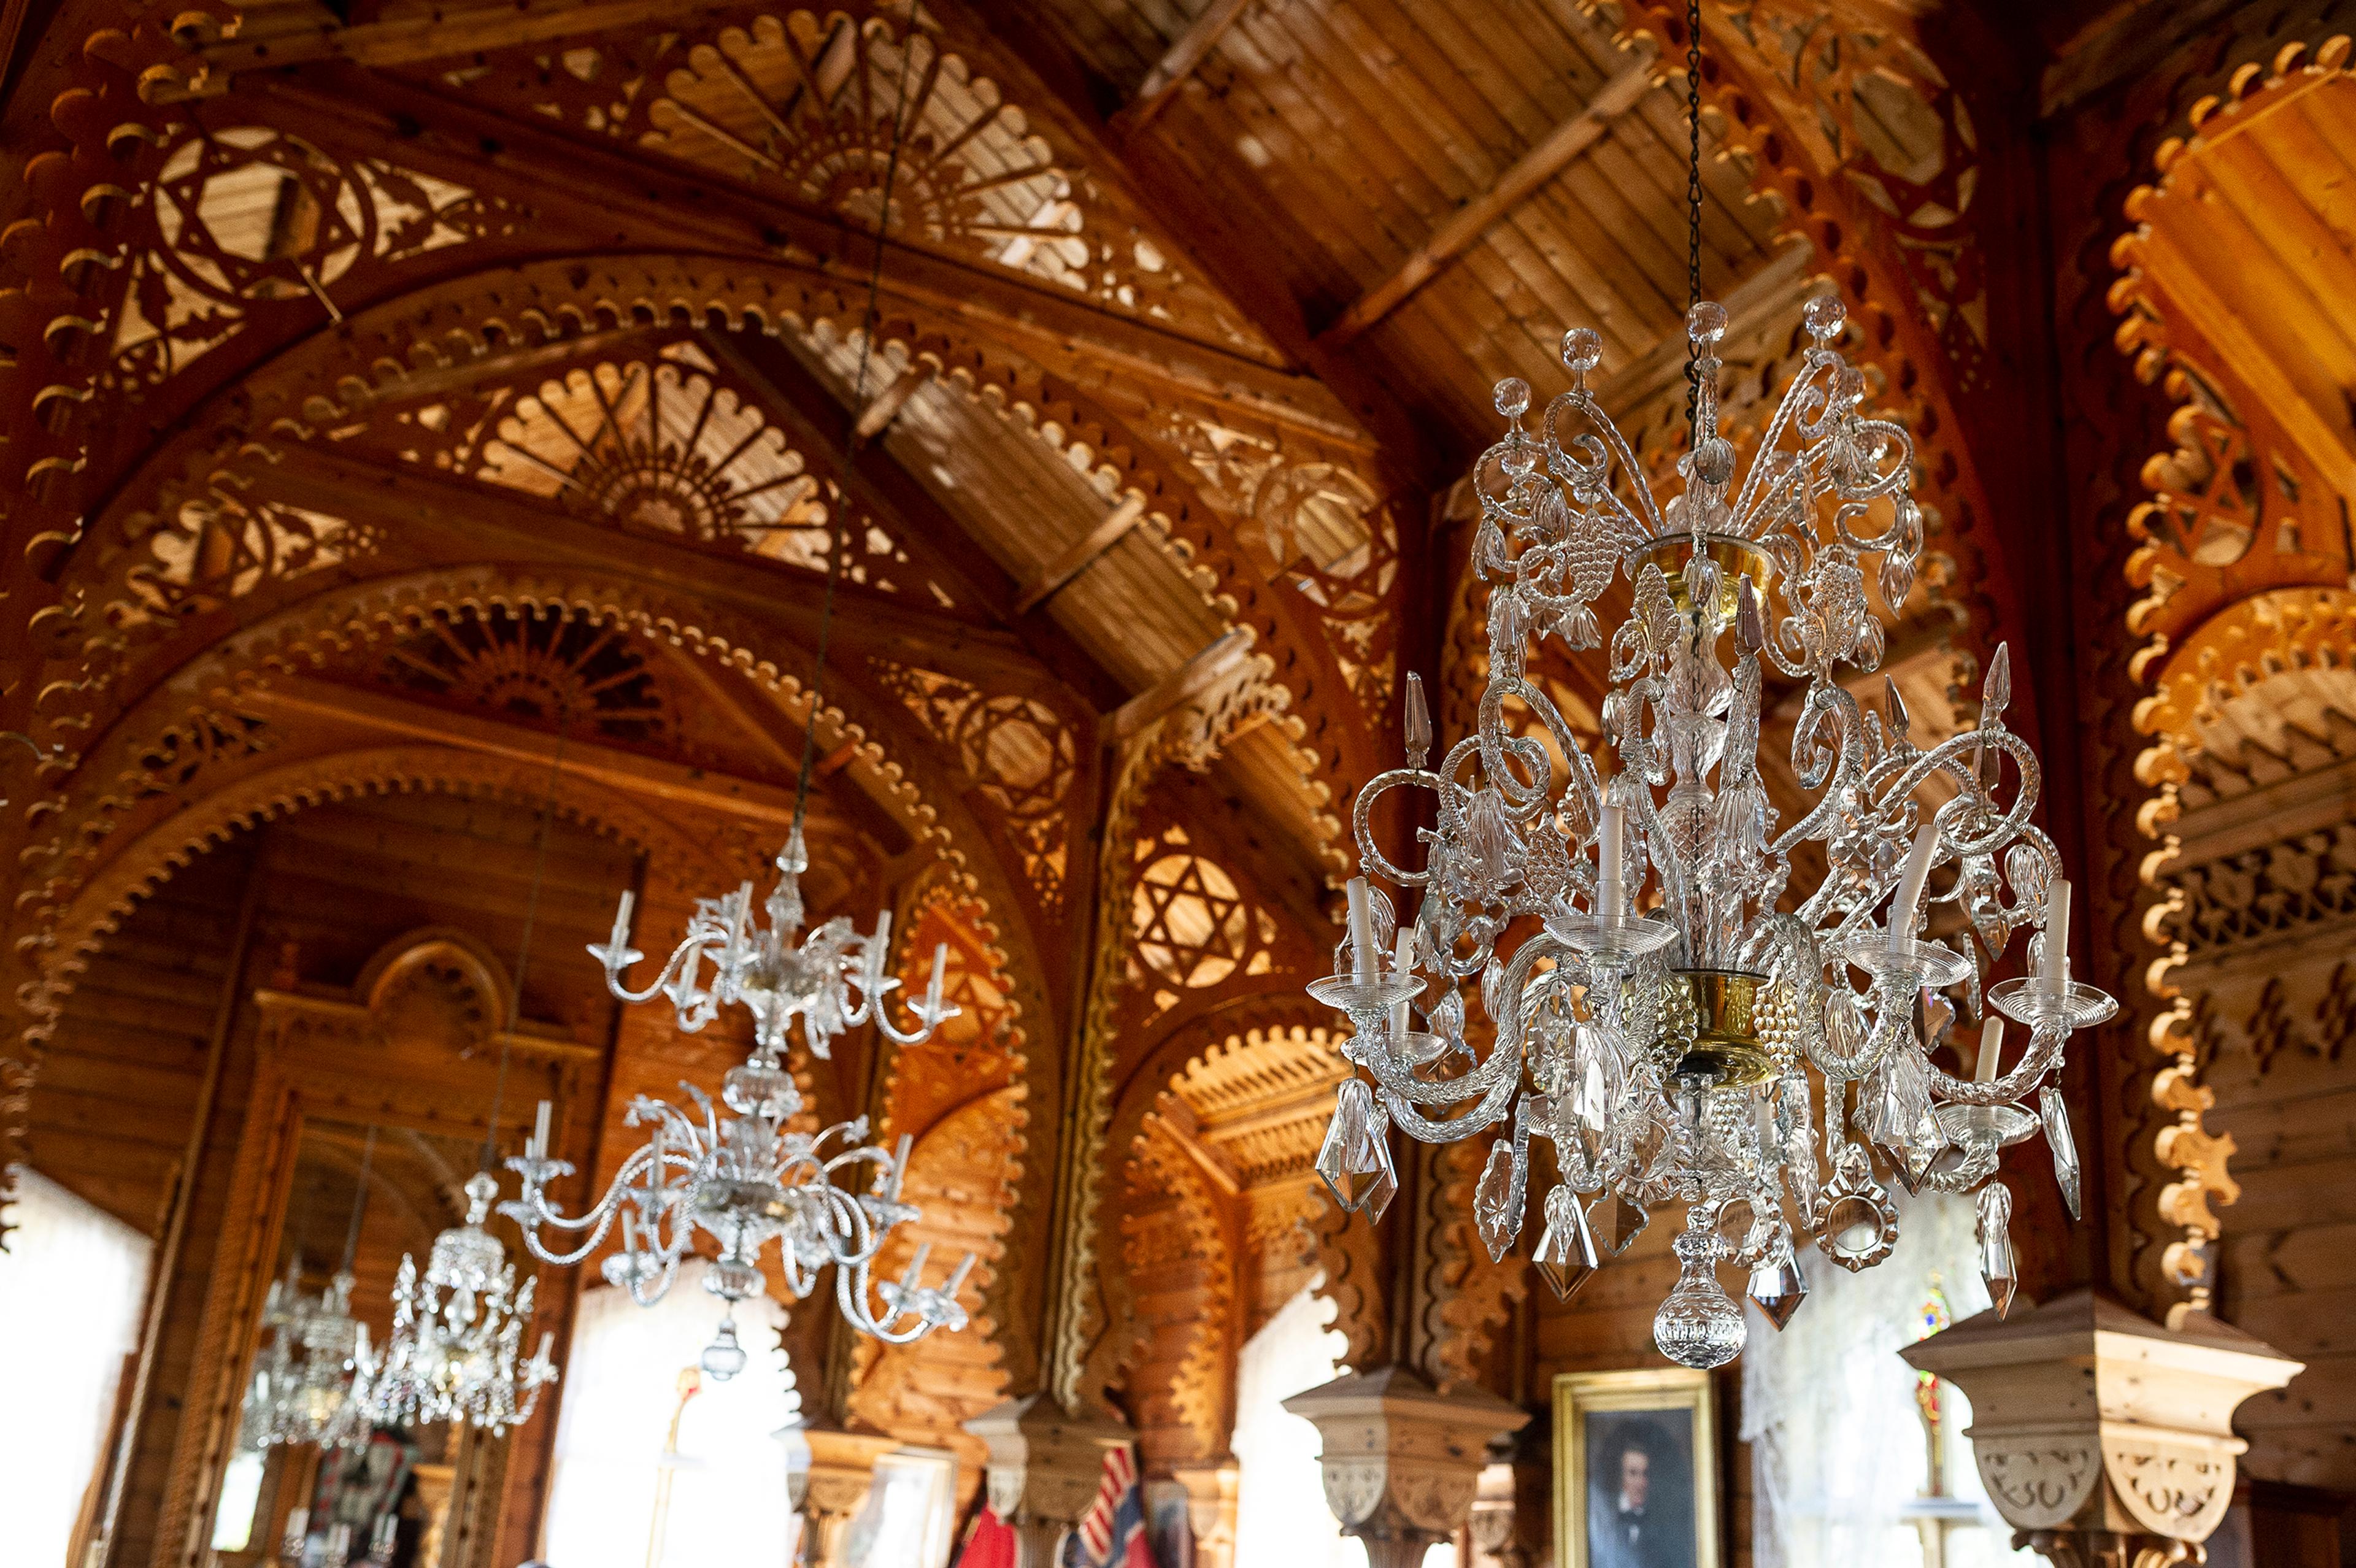 From the villa at Lysøen, with the richly ornamented ceiling and chandeliers.